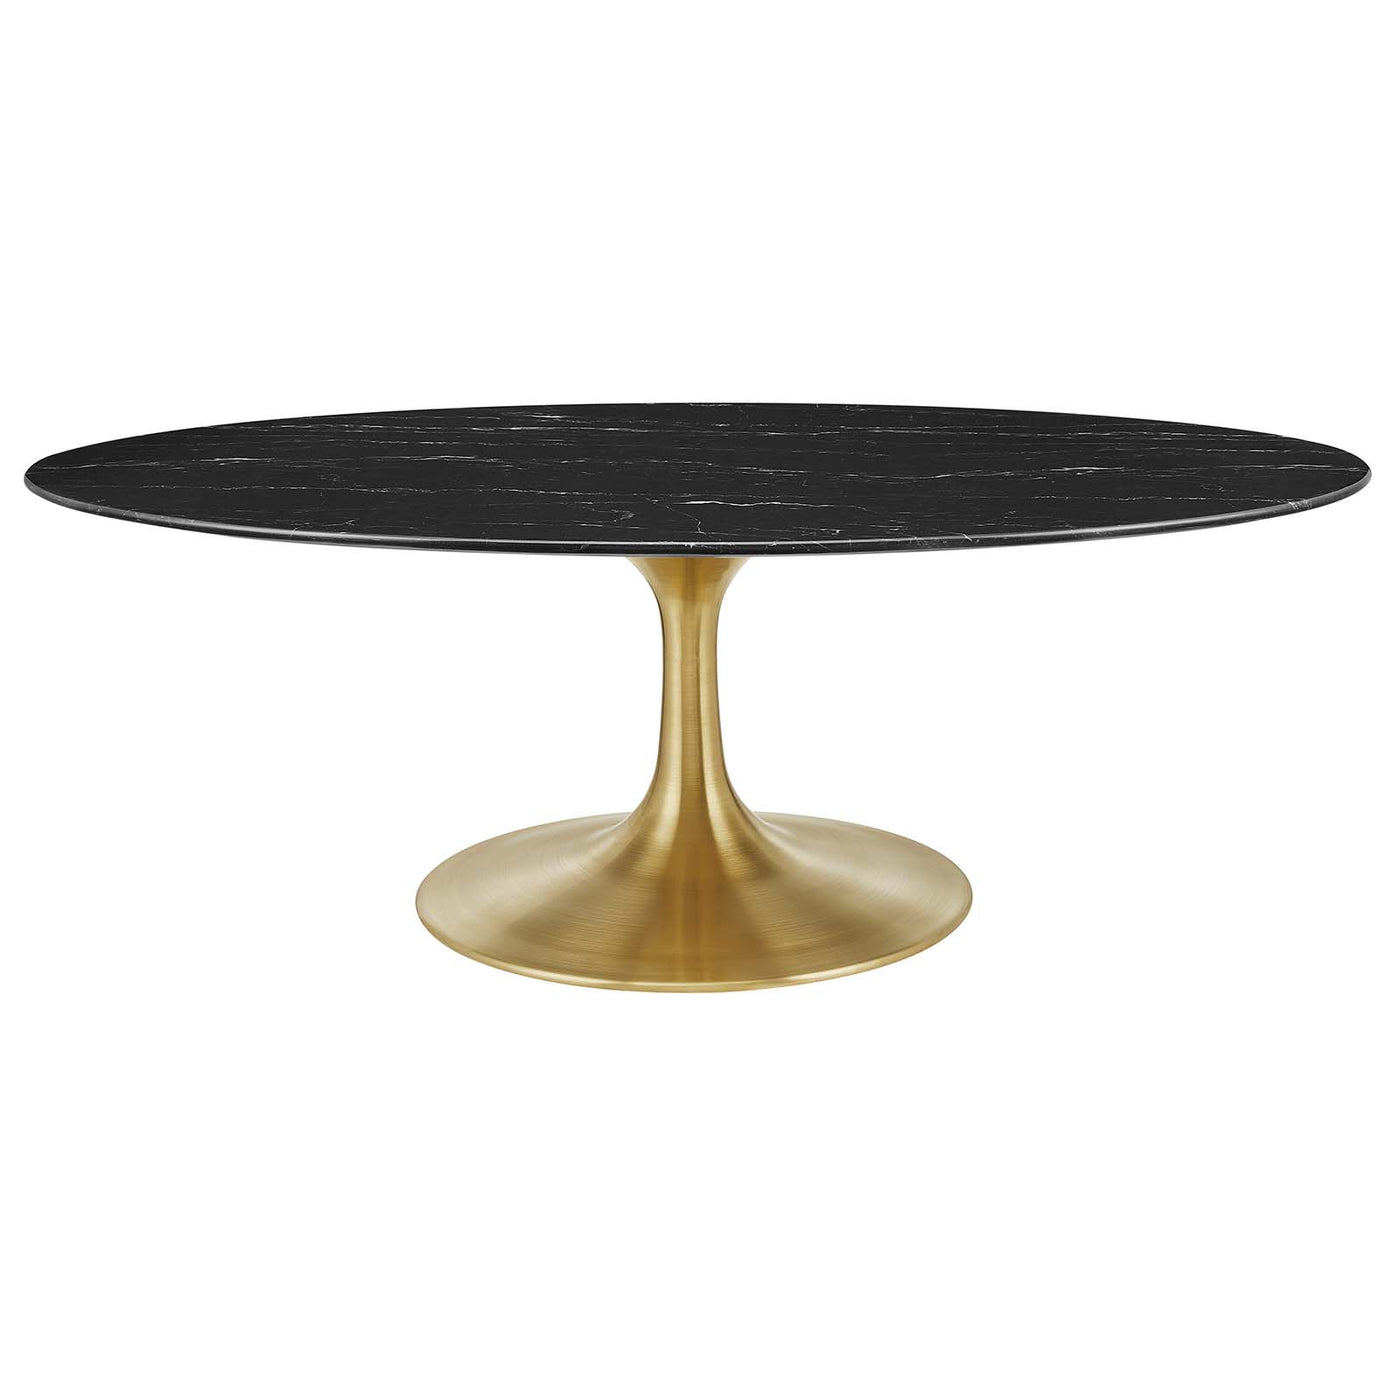 Lippa 48" Oval Artificial Marble Coffee Table